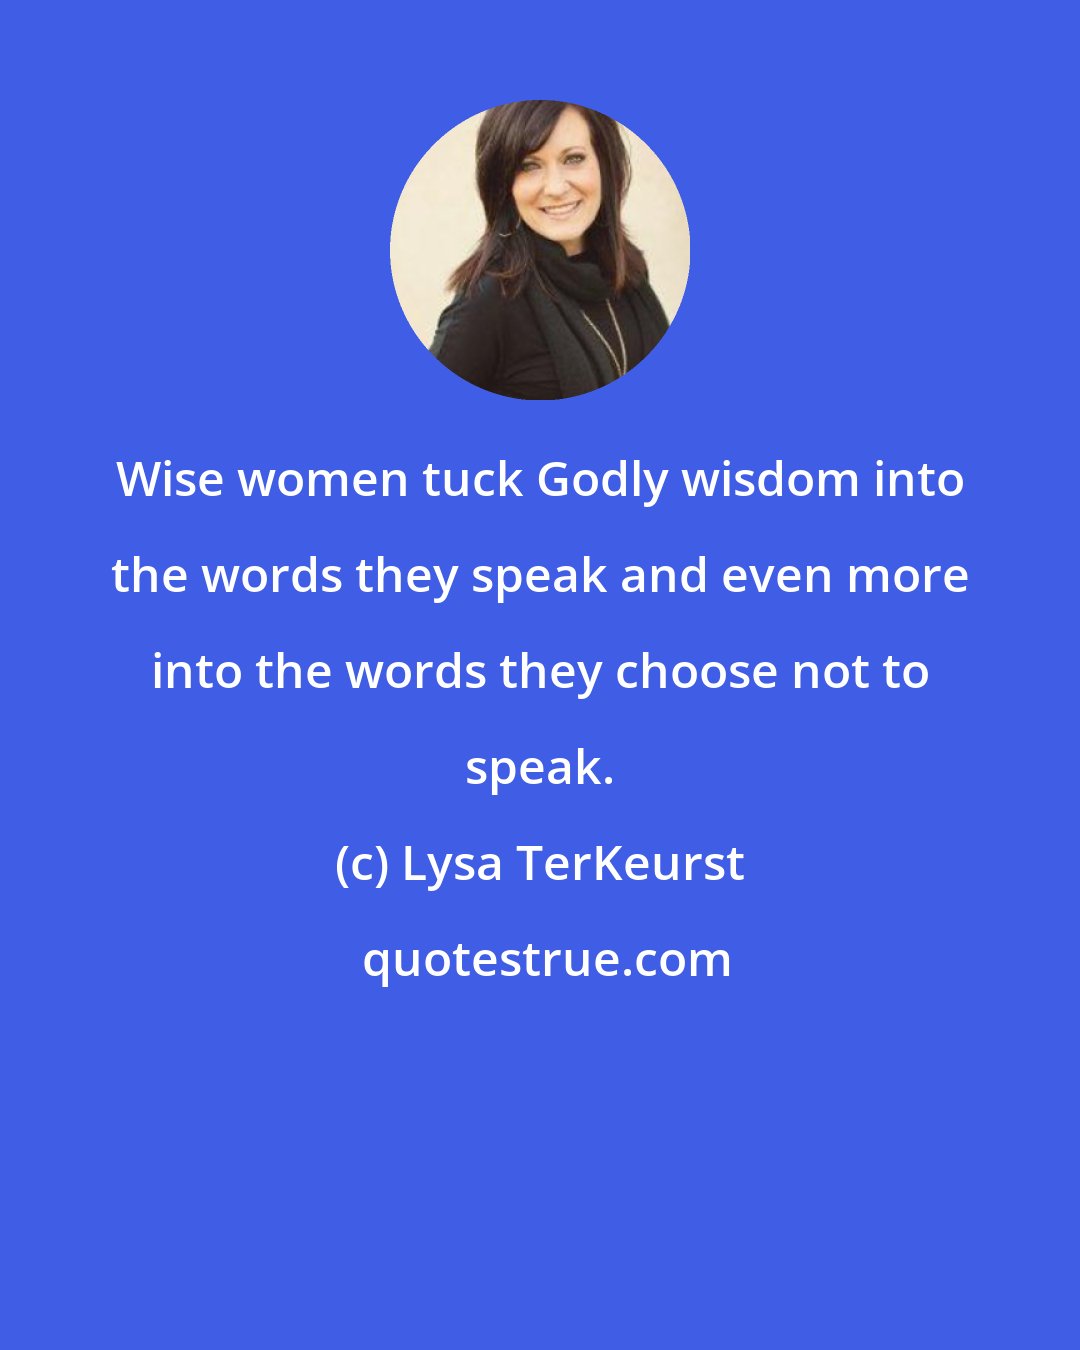 Lysa TerKeurst: Wise women tuck Godly wisdom into the words they speak and even more into the words they choose not to speak.